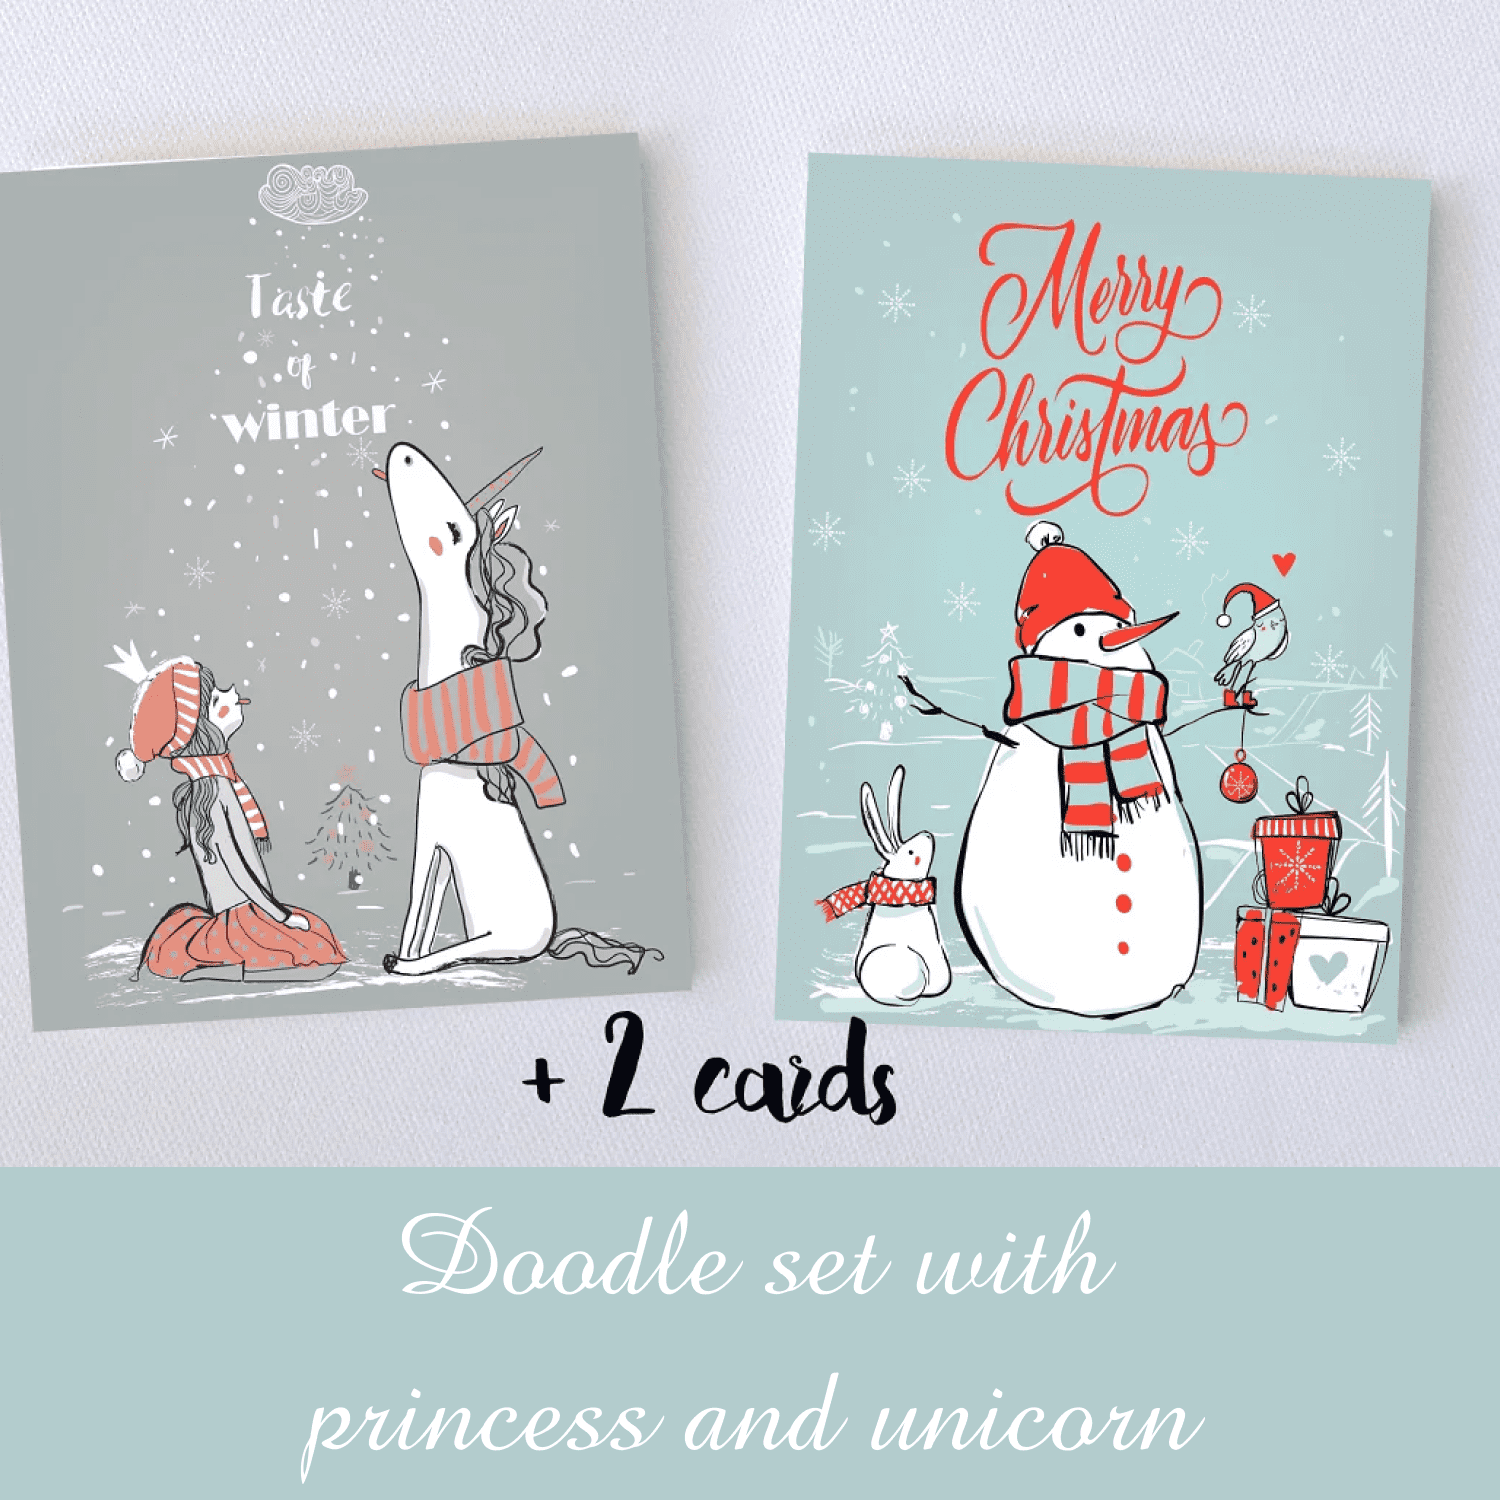 doodle set with princess and unicorn cover.